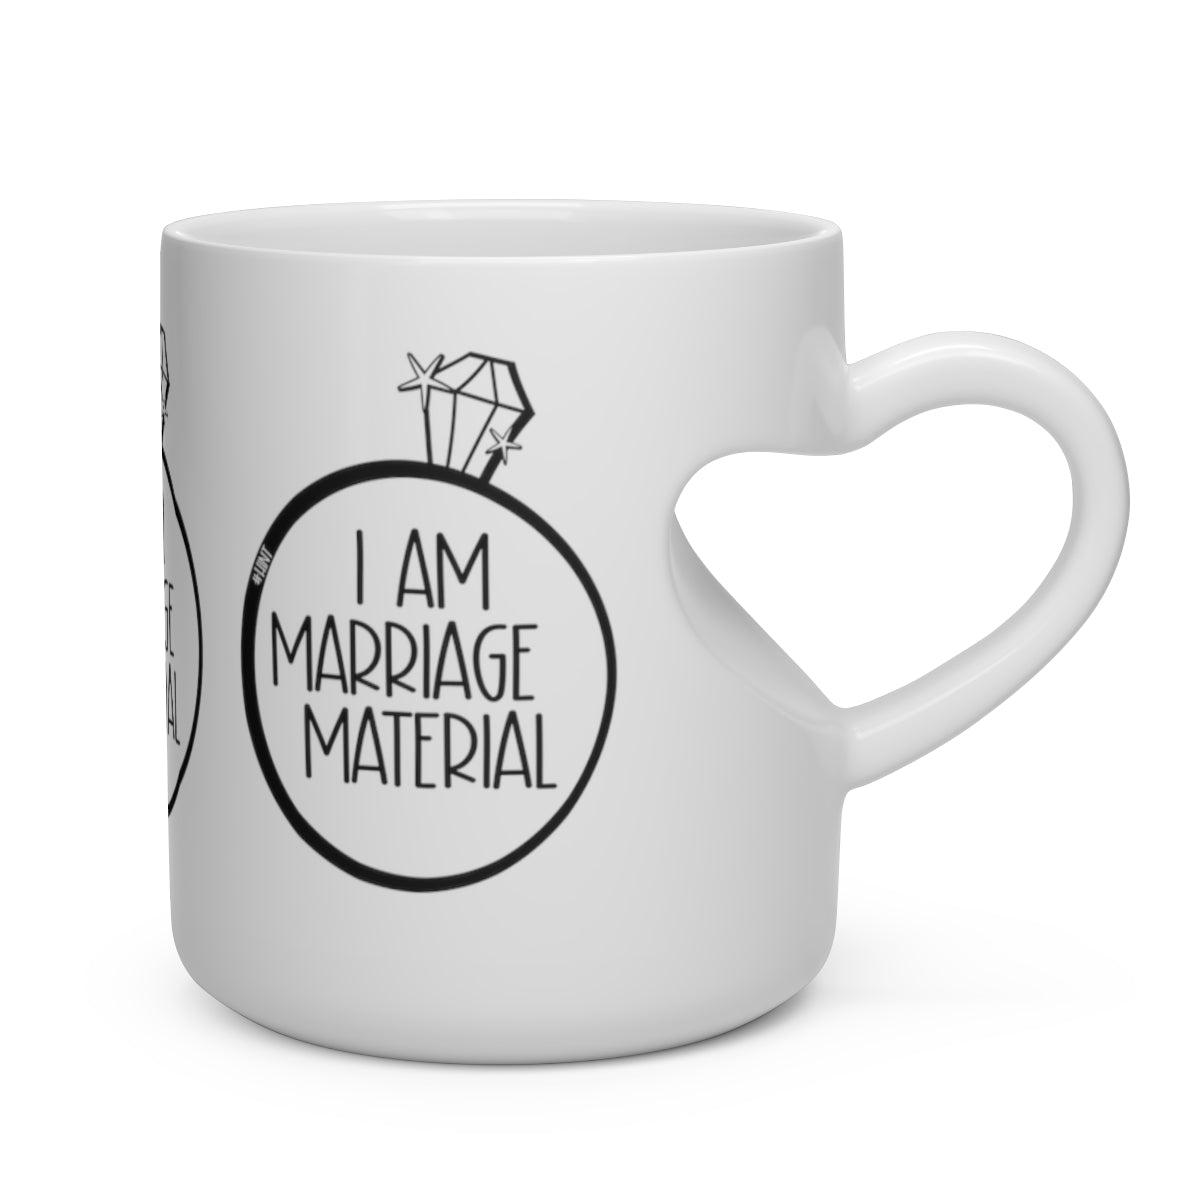 #WEIRDO | Weird gifts like this white mug with heart shaped handle is for you weirdos who wants to get married! Weirdo meme: I AM MARRIAGE MATERIAL.